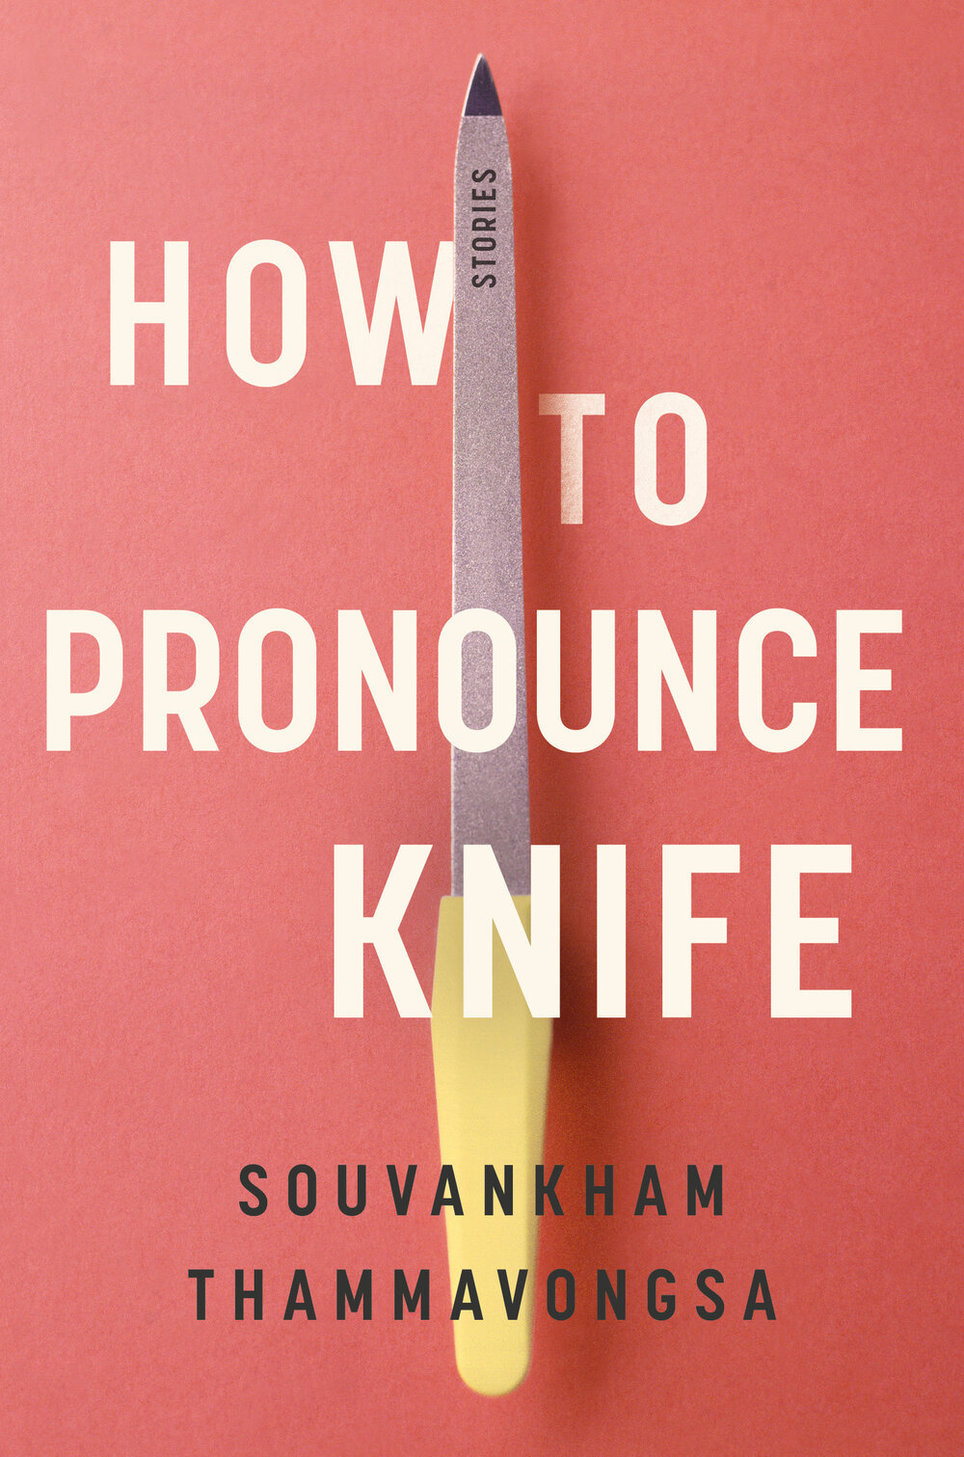 New Reads Book Club - How to Pronounce Knife